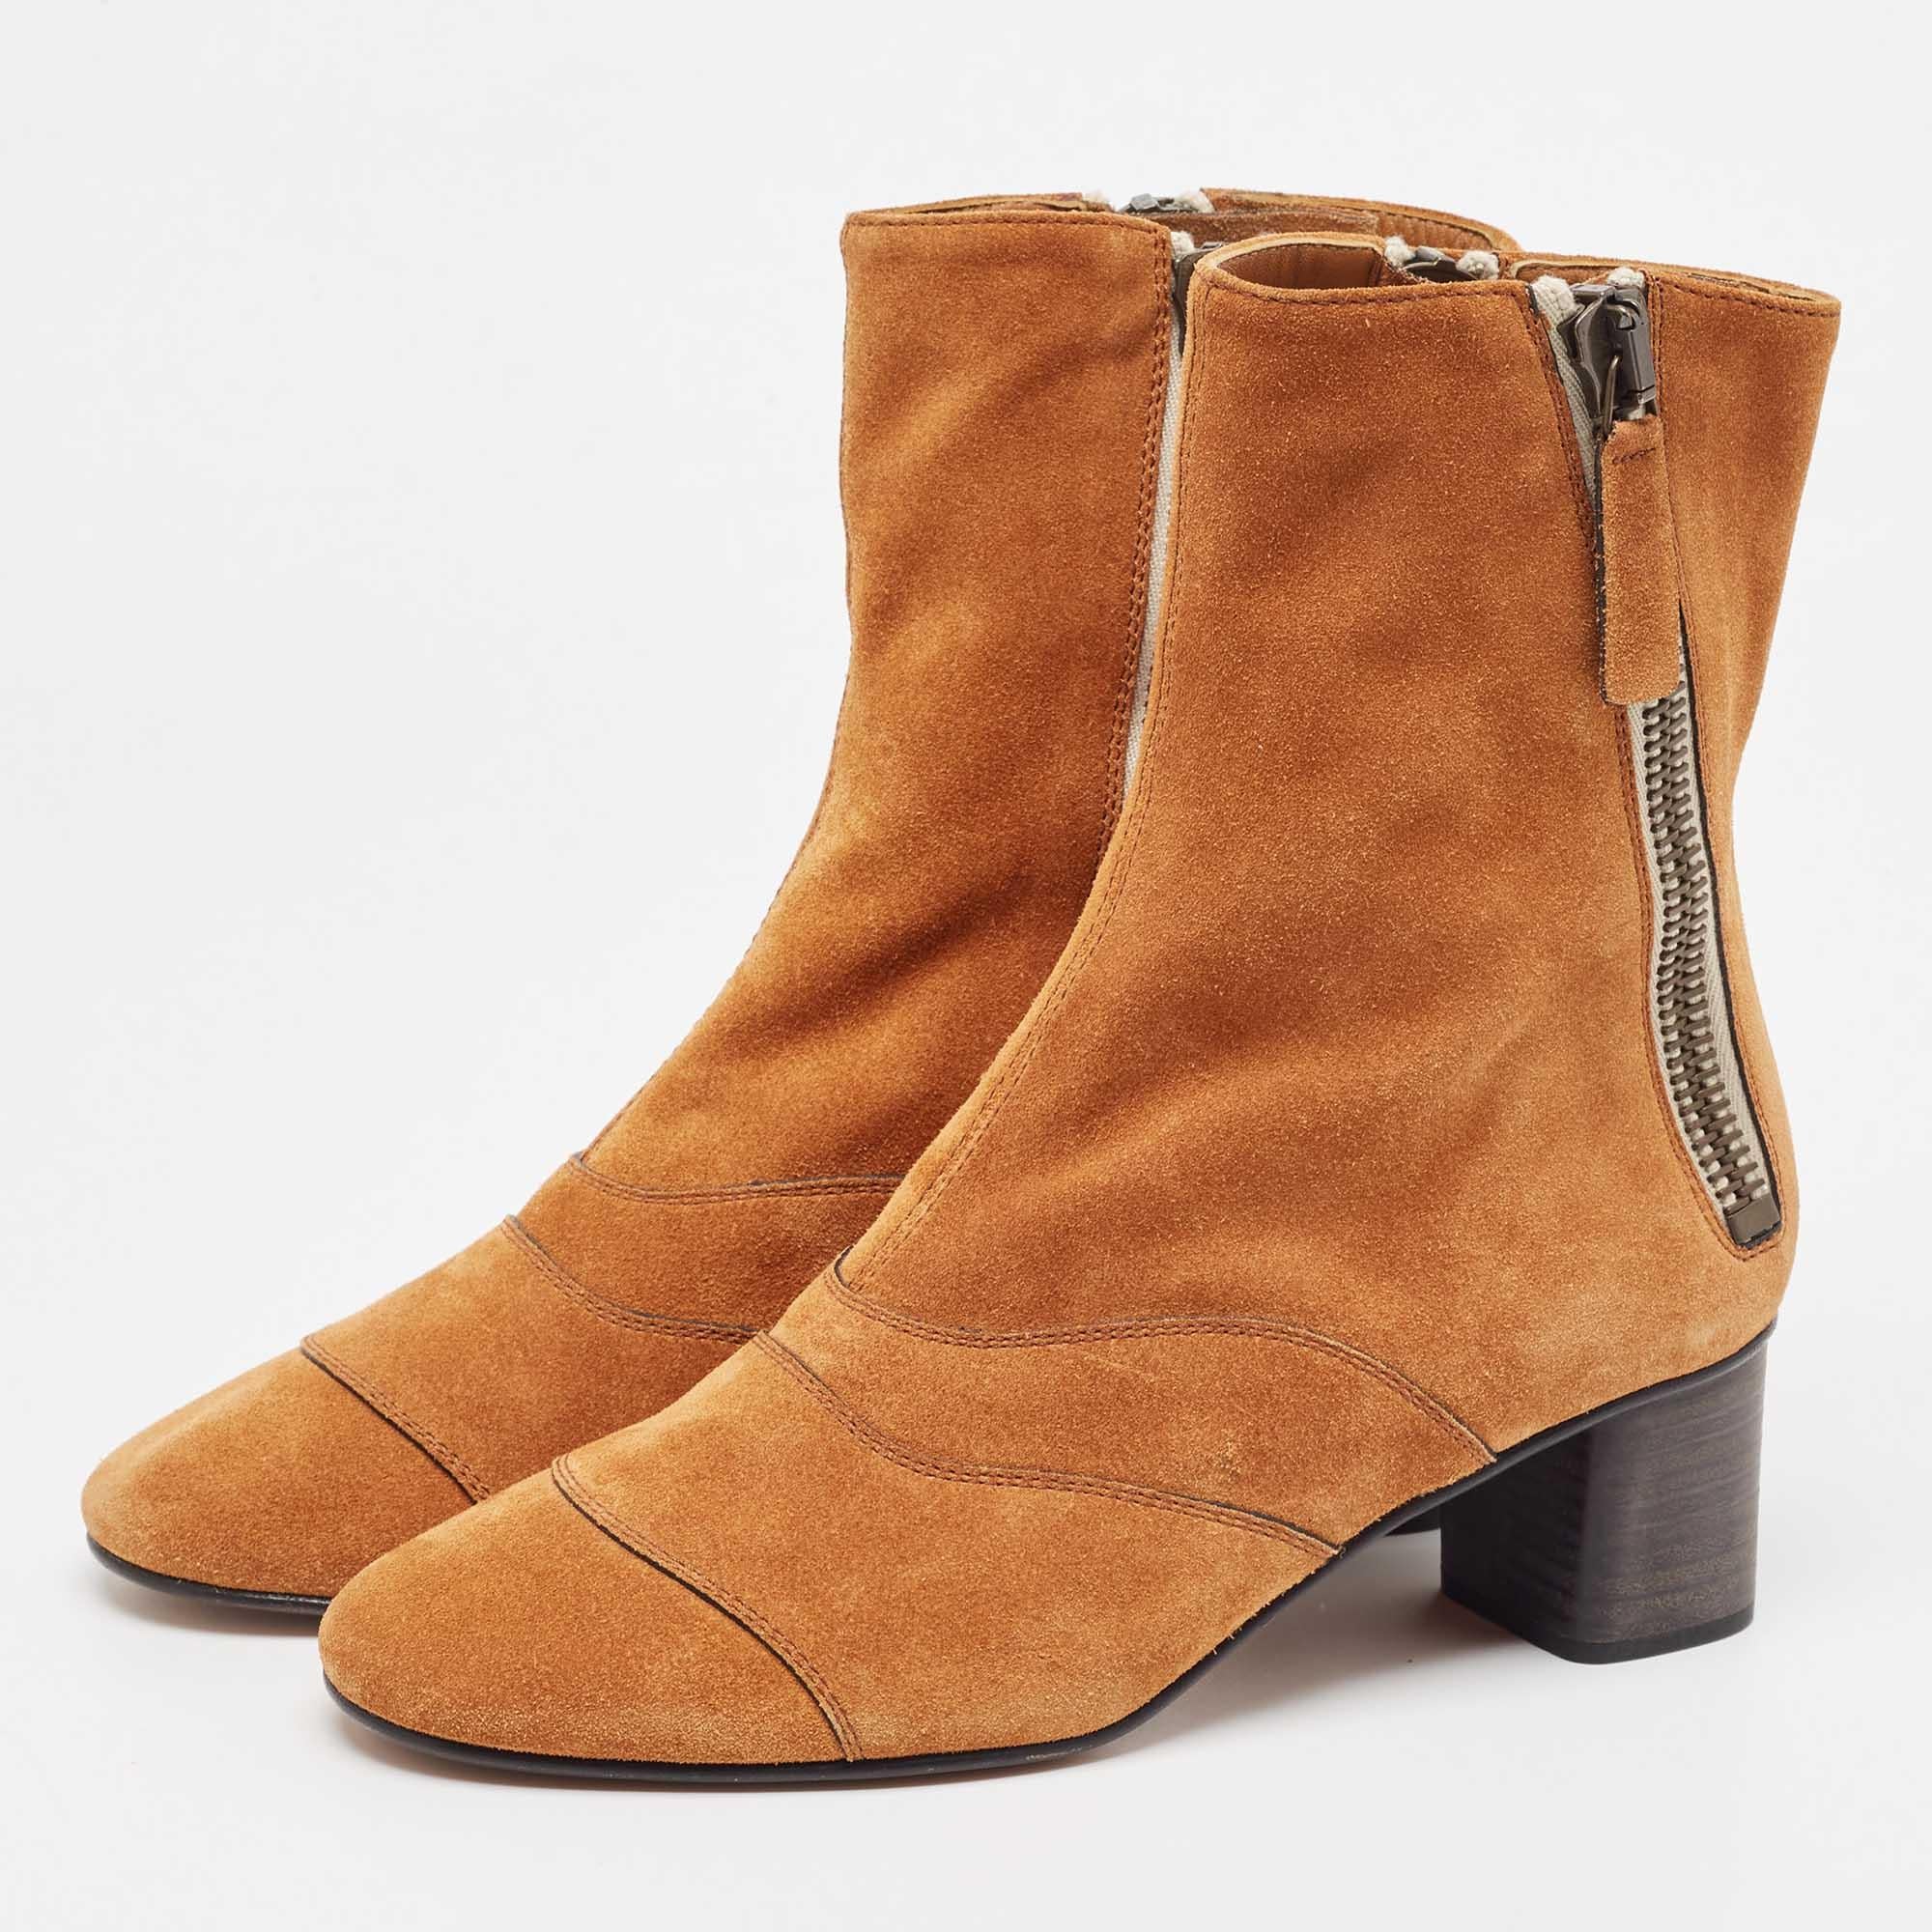 Boots are an essential part of your wardrobe, and these boots, crafted from top-quality materials, are a fine choice. Offering the best of comfort and style, this sturdy-soled pair would be great with a dress for a casual day out!

Includes: